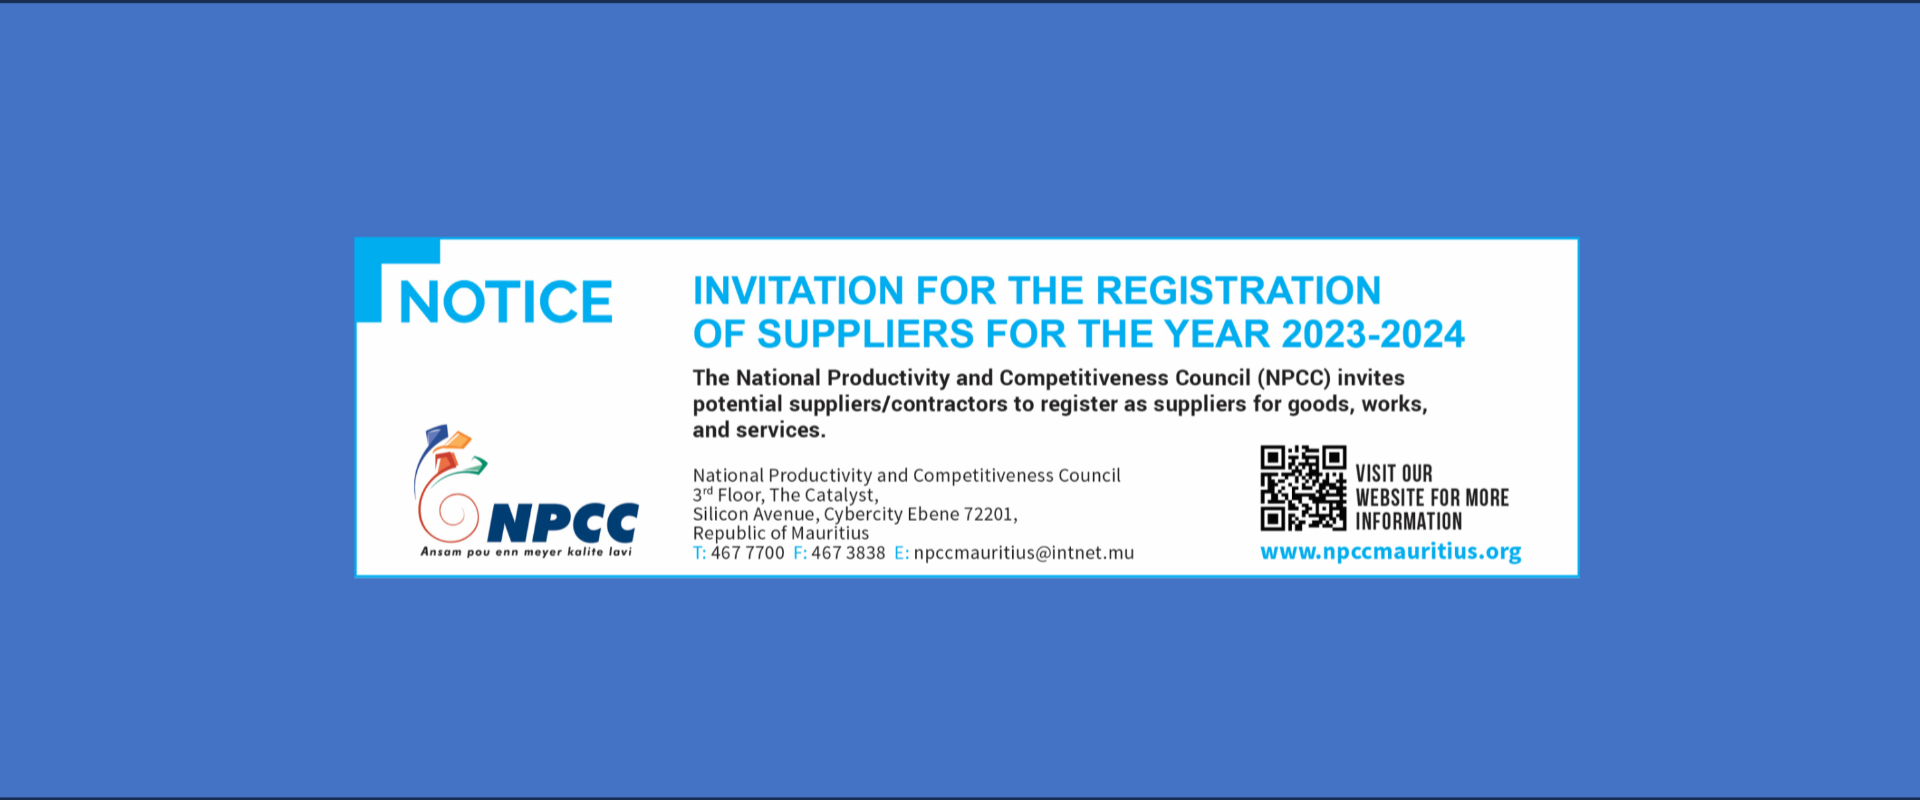 Invitation for the registration of suppliers 2232224